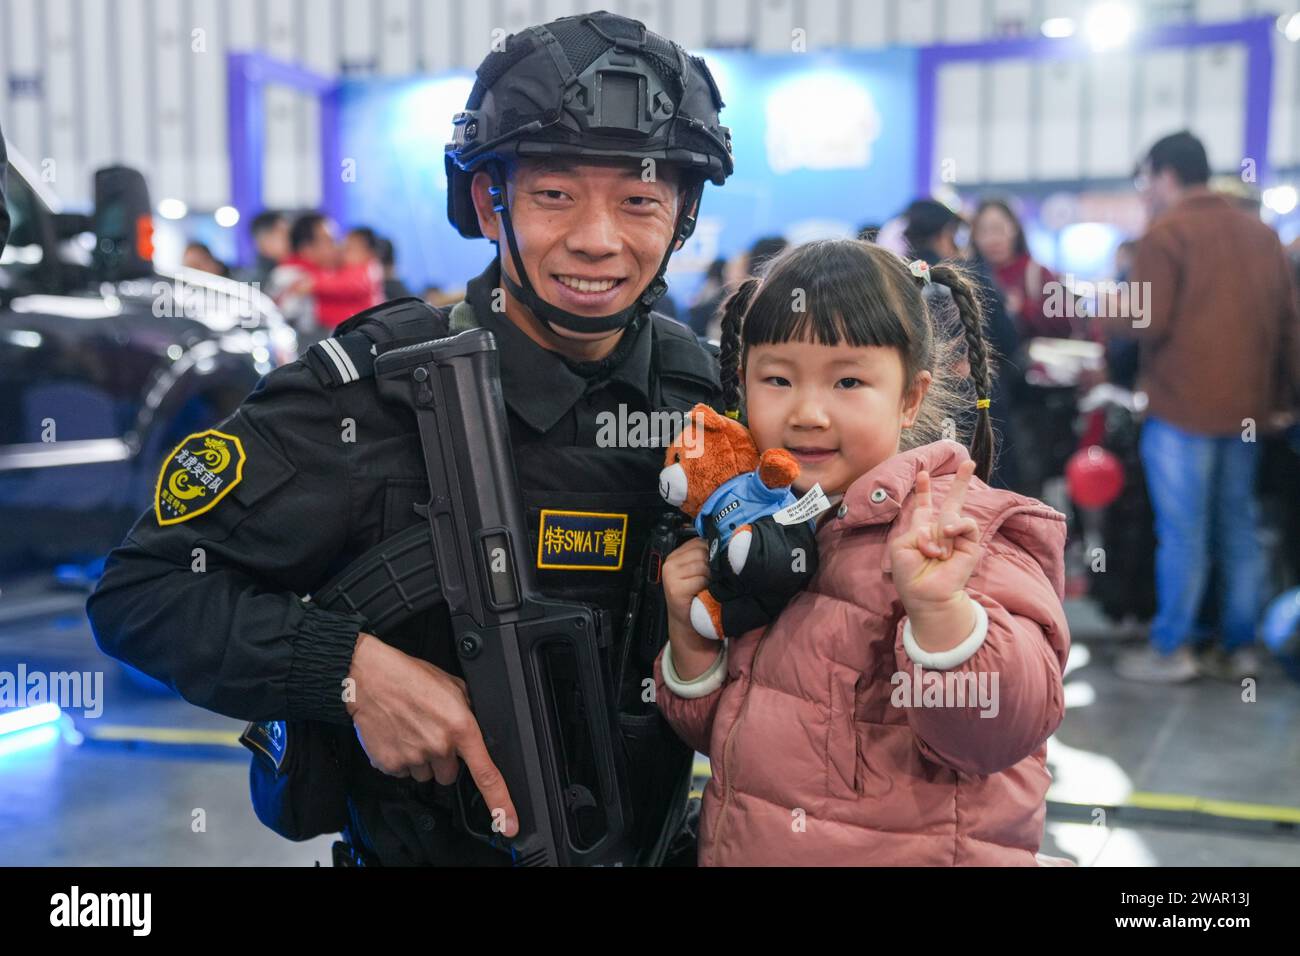 Nanjing, China's Jiangsu Province. 6th Jan, 2024. A young visitor poses with a SWAT member for a photo during a police open week event in Nanjing, east China's Jiangsu Province, Jan. 6, 2024. A five-day open week event organized by the Nanjing Municipal Public Security Bureau was initiated Saturday at Nanjing International Expo Center. With various online and offline activities, the open week aims to bring the public closer to the life and work of police officers. China will mark its fourth national police day on Jan. 10 this year. Credit: Li Bo/Xinhua/Alamy Live News Stock Photo